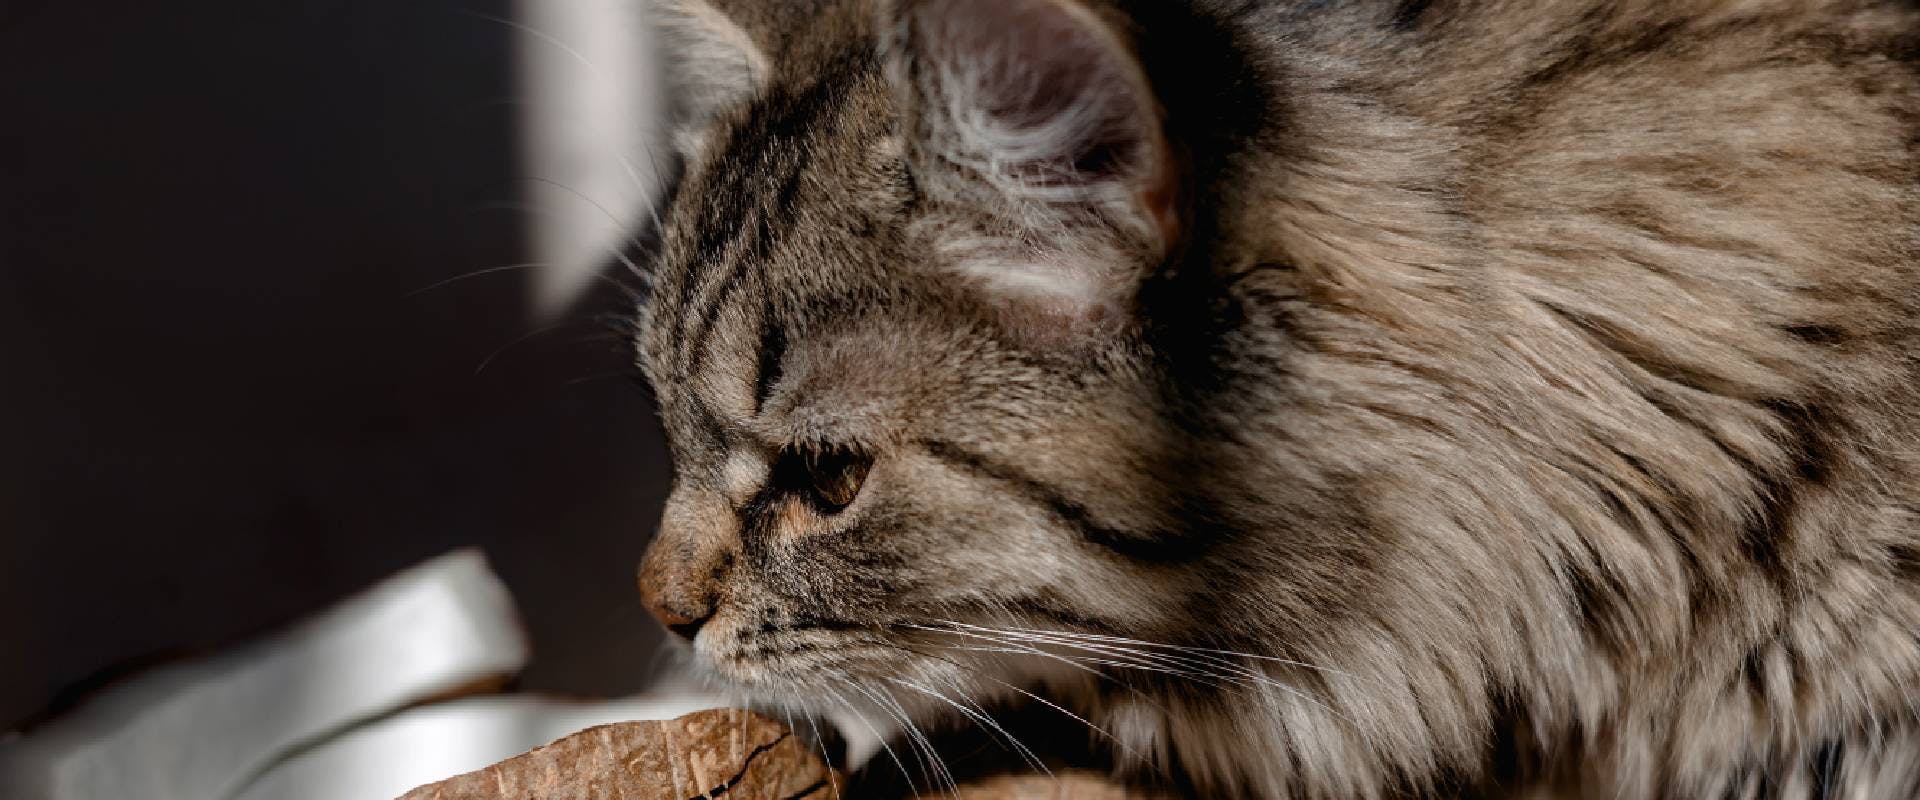 Fluffy tabby cat sniffing a coconut